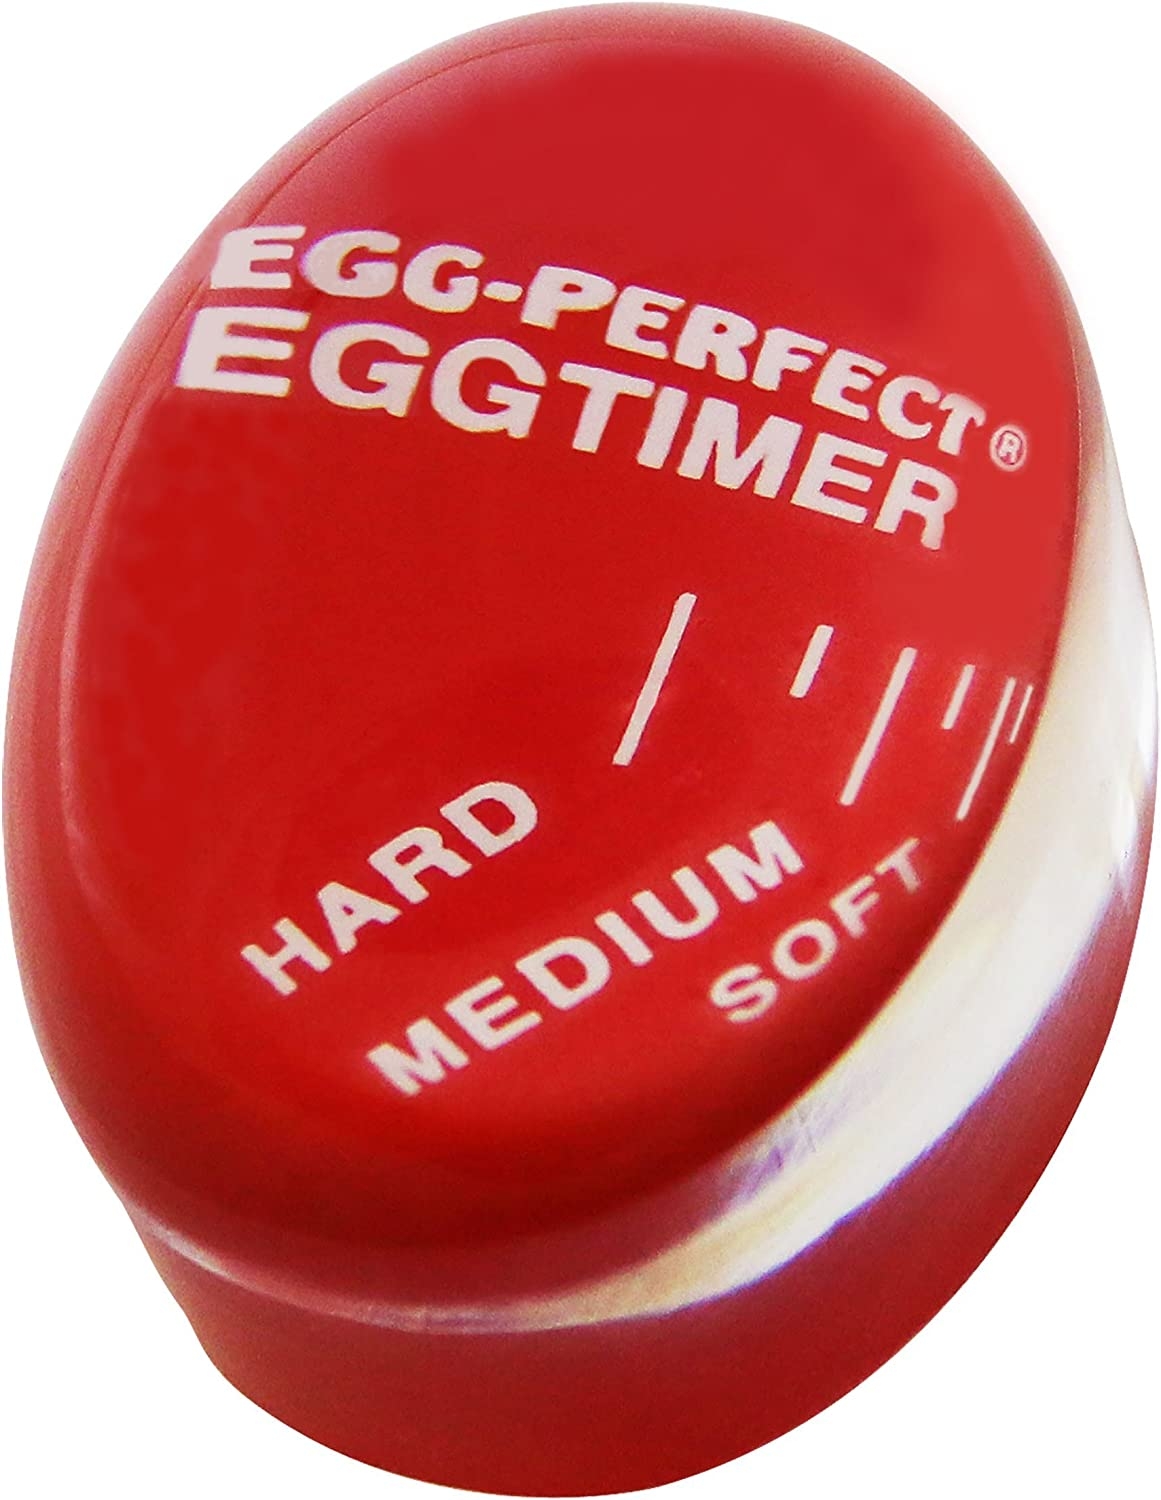 Norpro Egg Perfect Egg Timer Import To Shop ×Product customization General Description Gallery Reviews Variations Specification